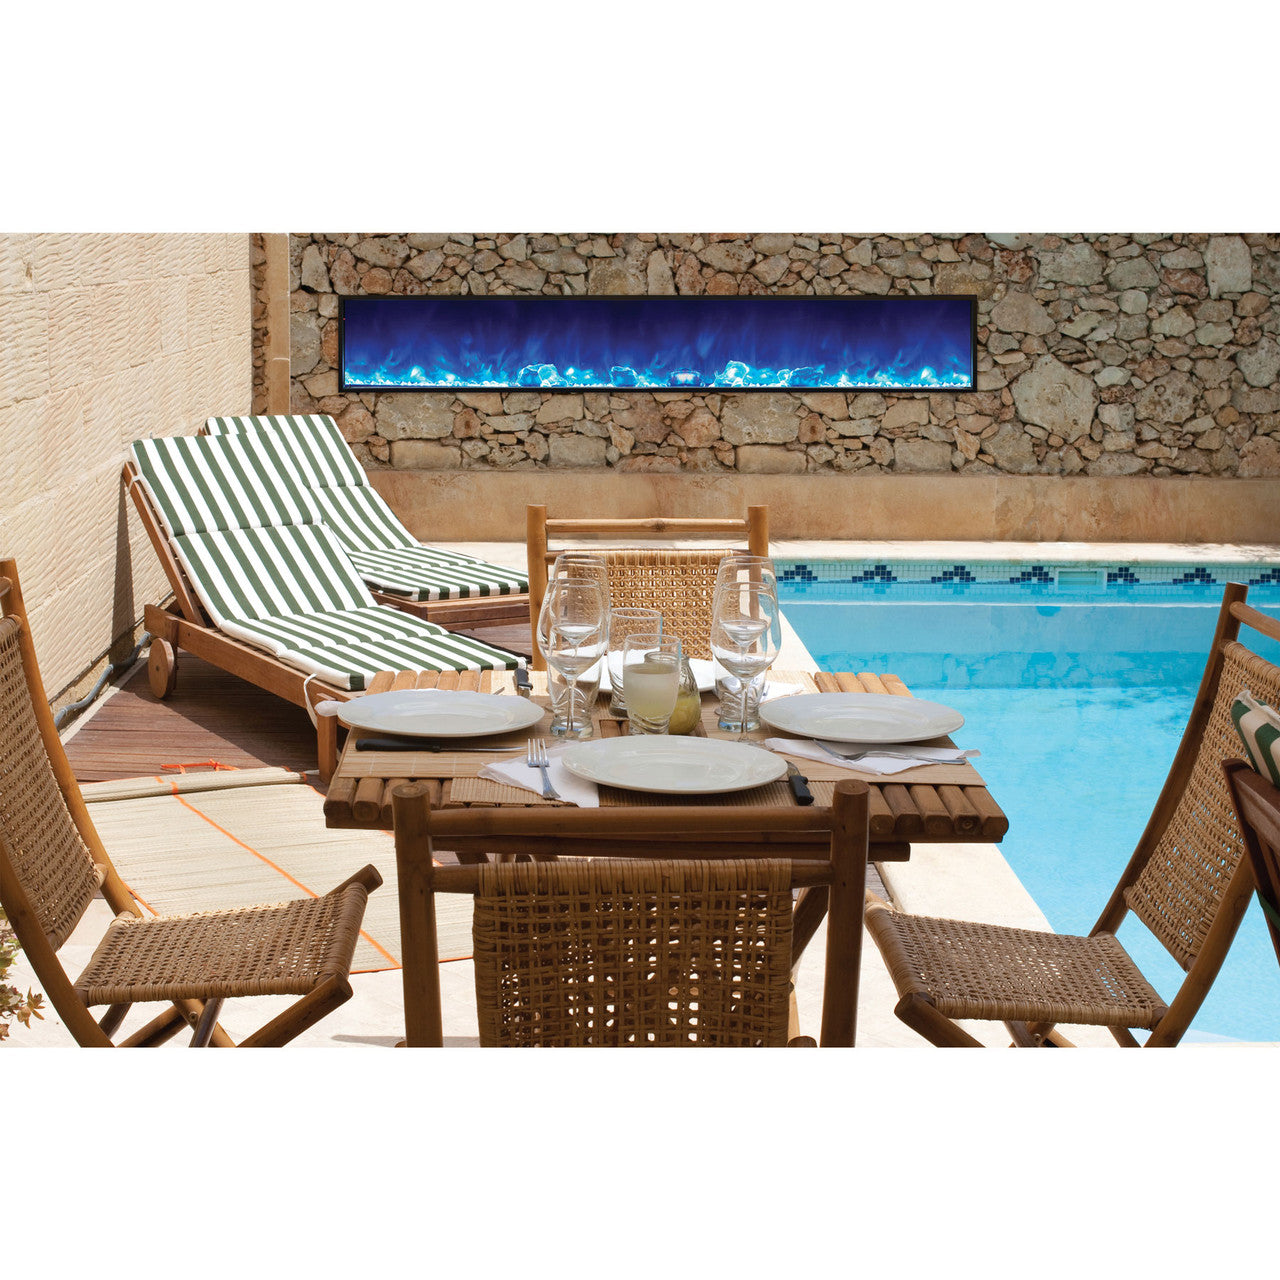 Amantii 88" Panorama Slim Indoor or Outdoor Electric Fireplace -BI-88-SLIM-OD- Lifestyle Pool With Fireplace Stone Wall